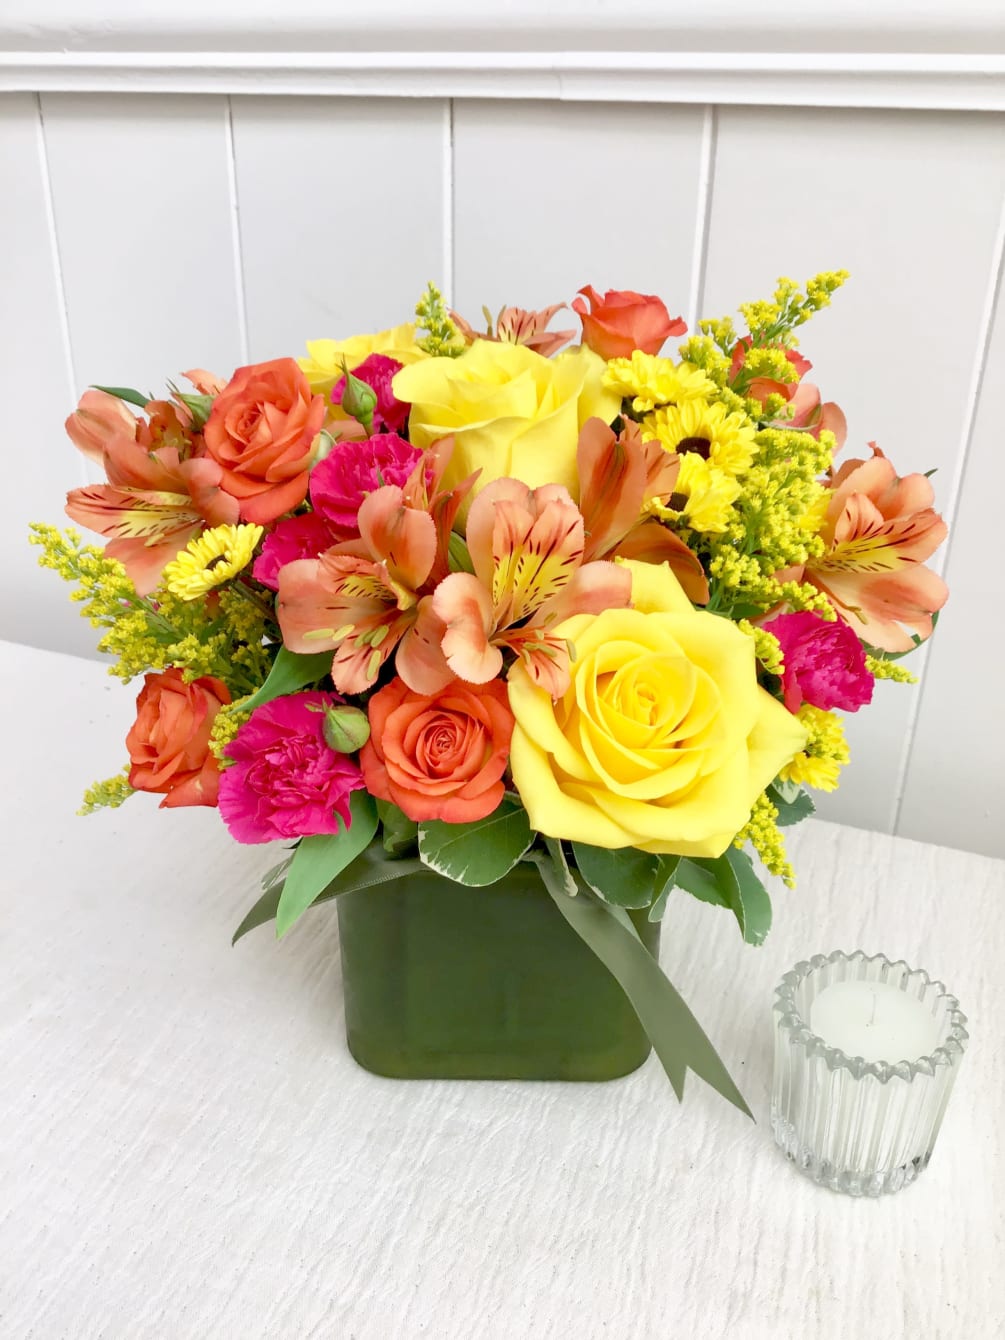 A fresh and bright arrangement in warm summer shades. Expertly arranged in